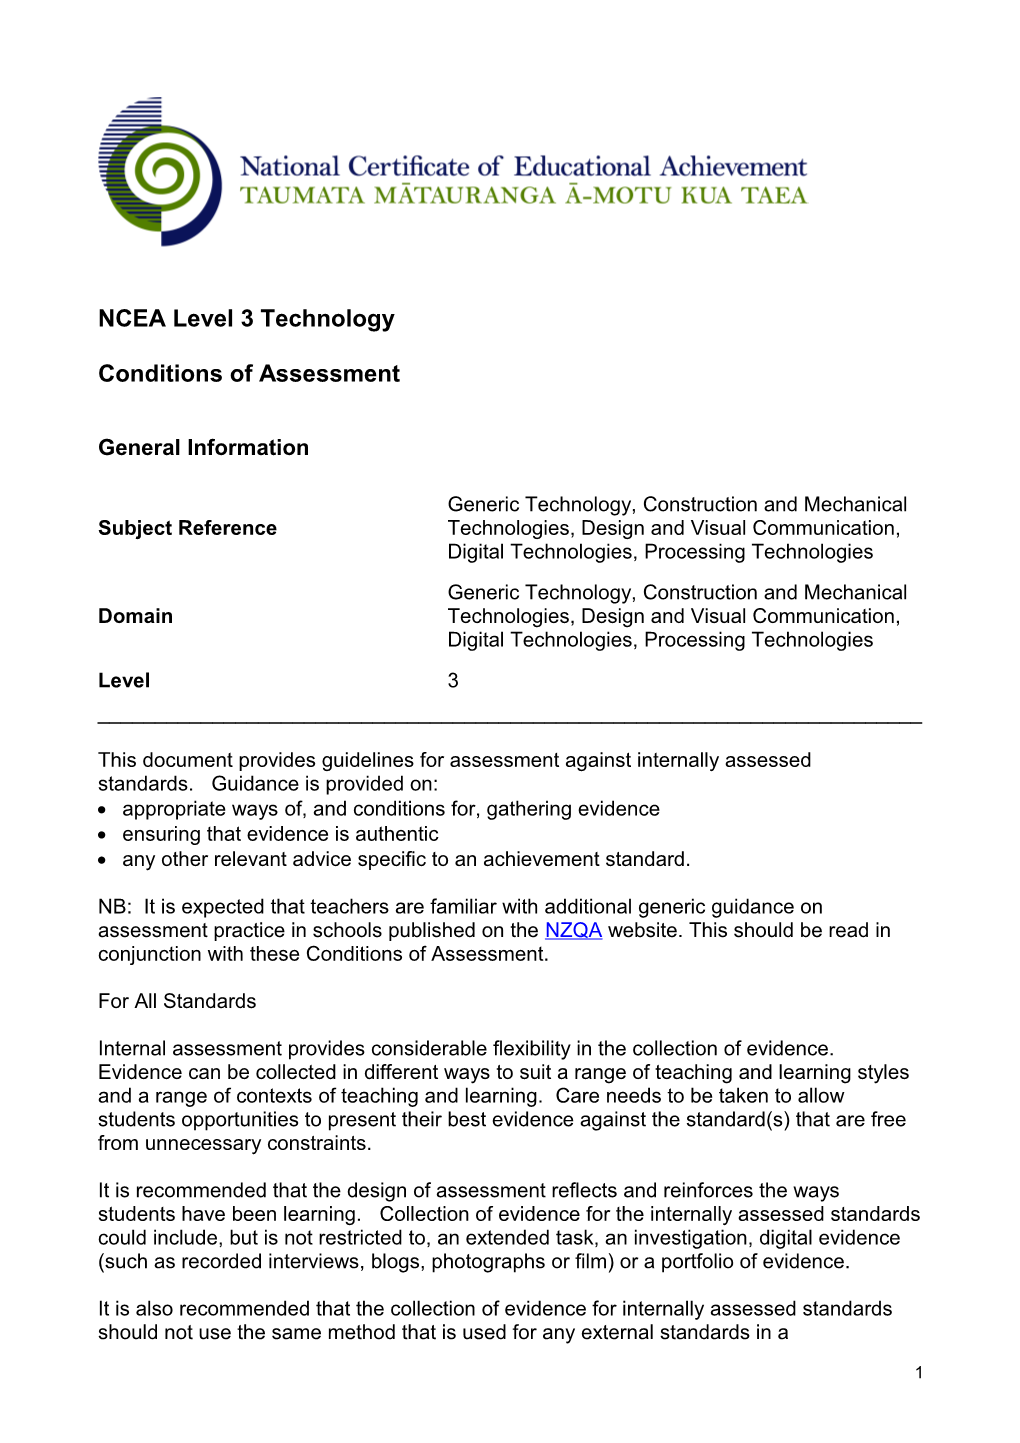 NCEA Level 3 Technology